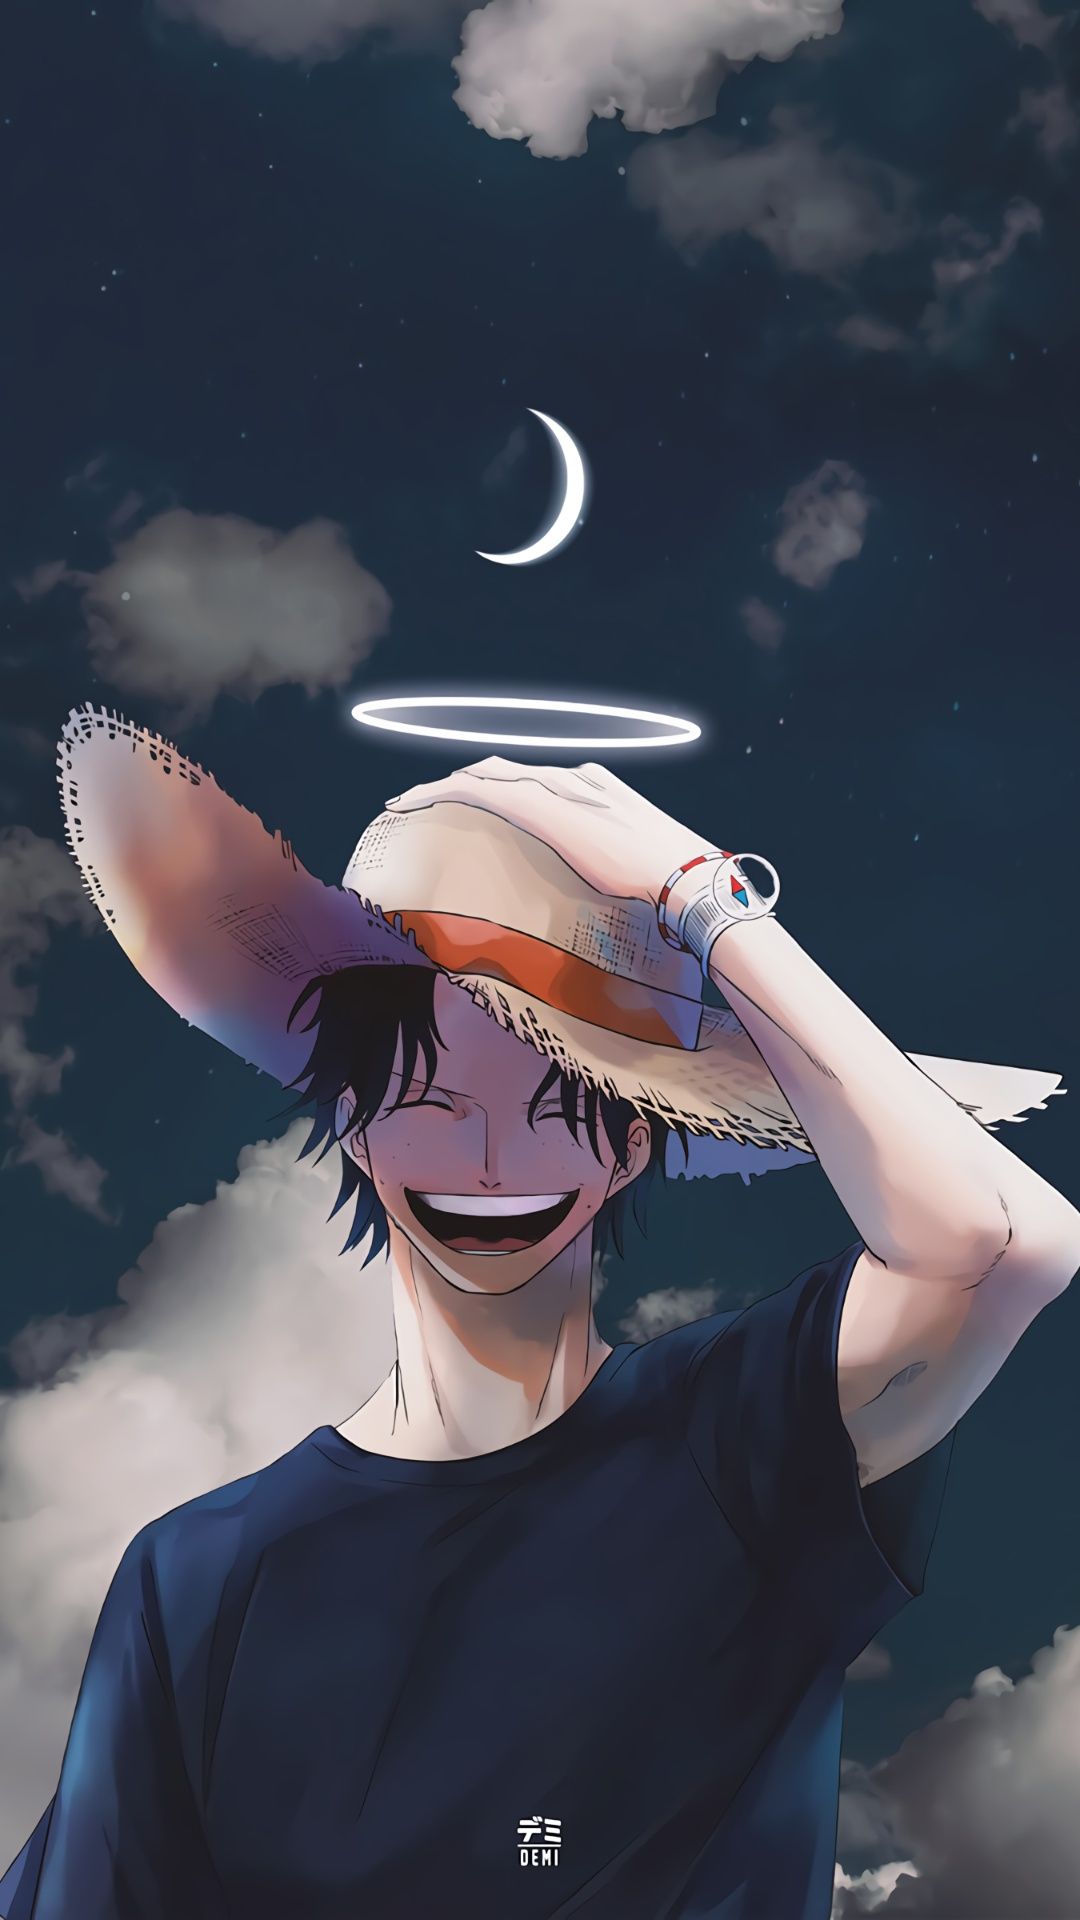 One Piece anime wallpaper for mobiles and phones. - One Piece